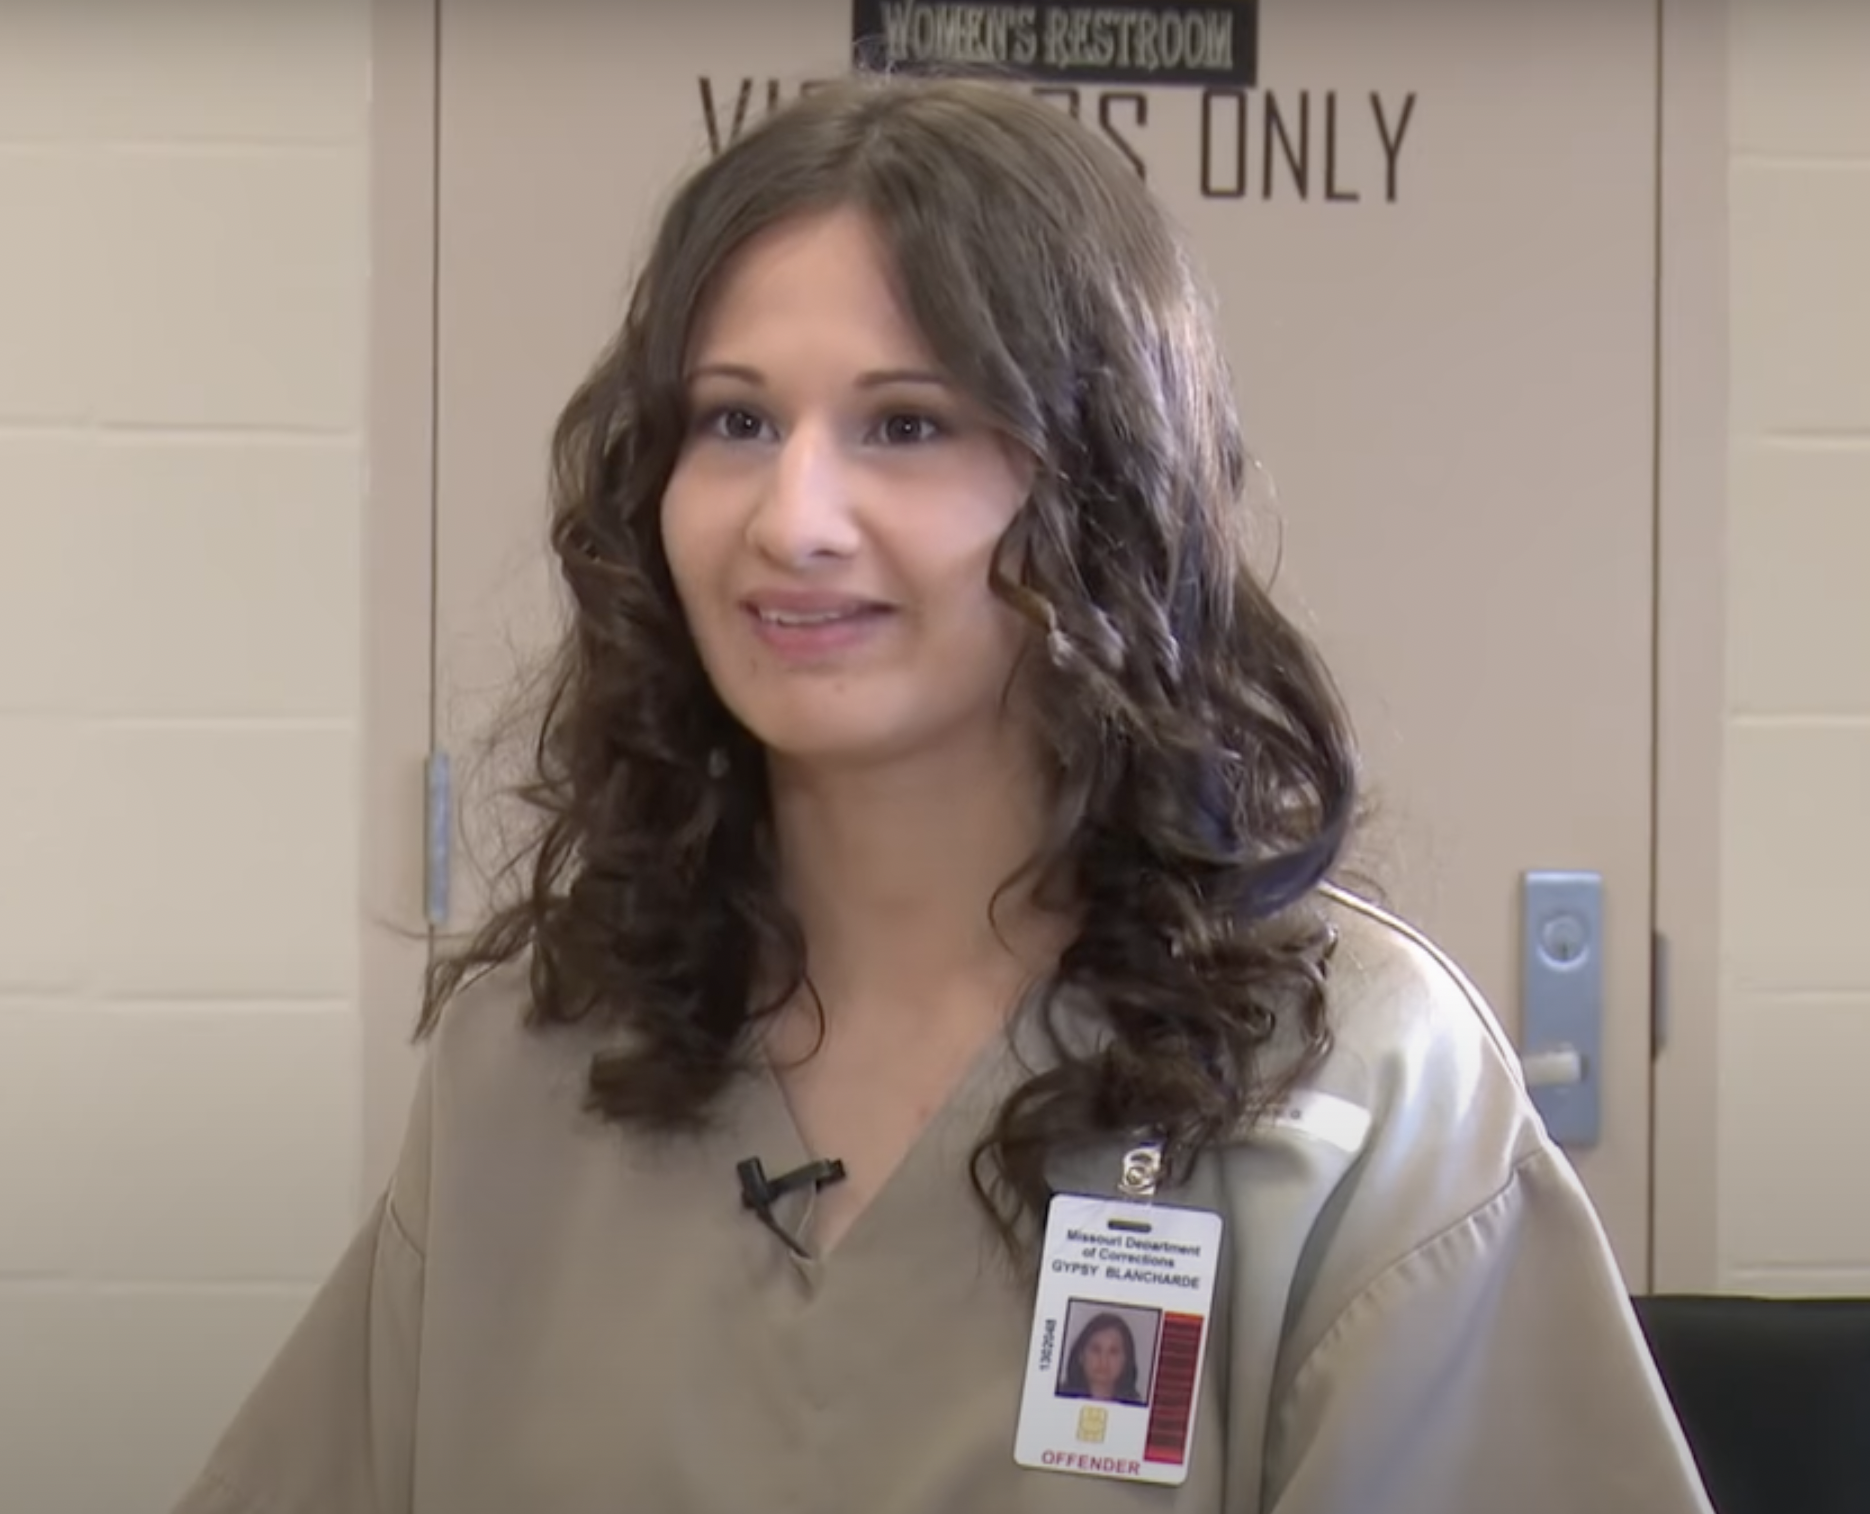 Gypsy Rose Blanchard during an interview, dated November 21, 2017 | Source: Youtube.com/drphil